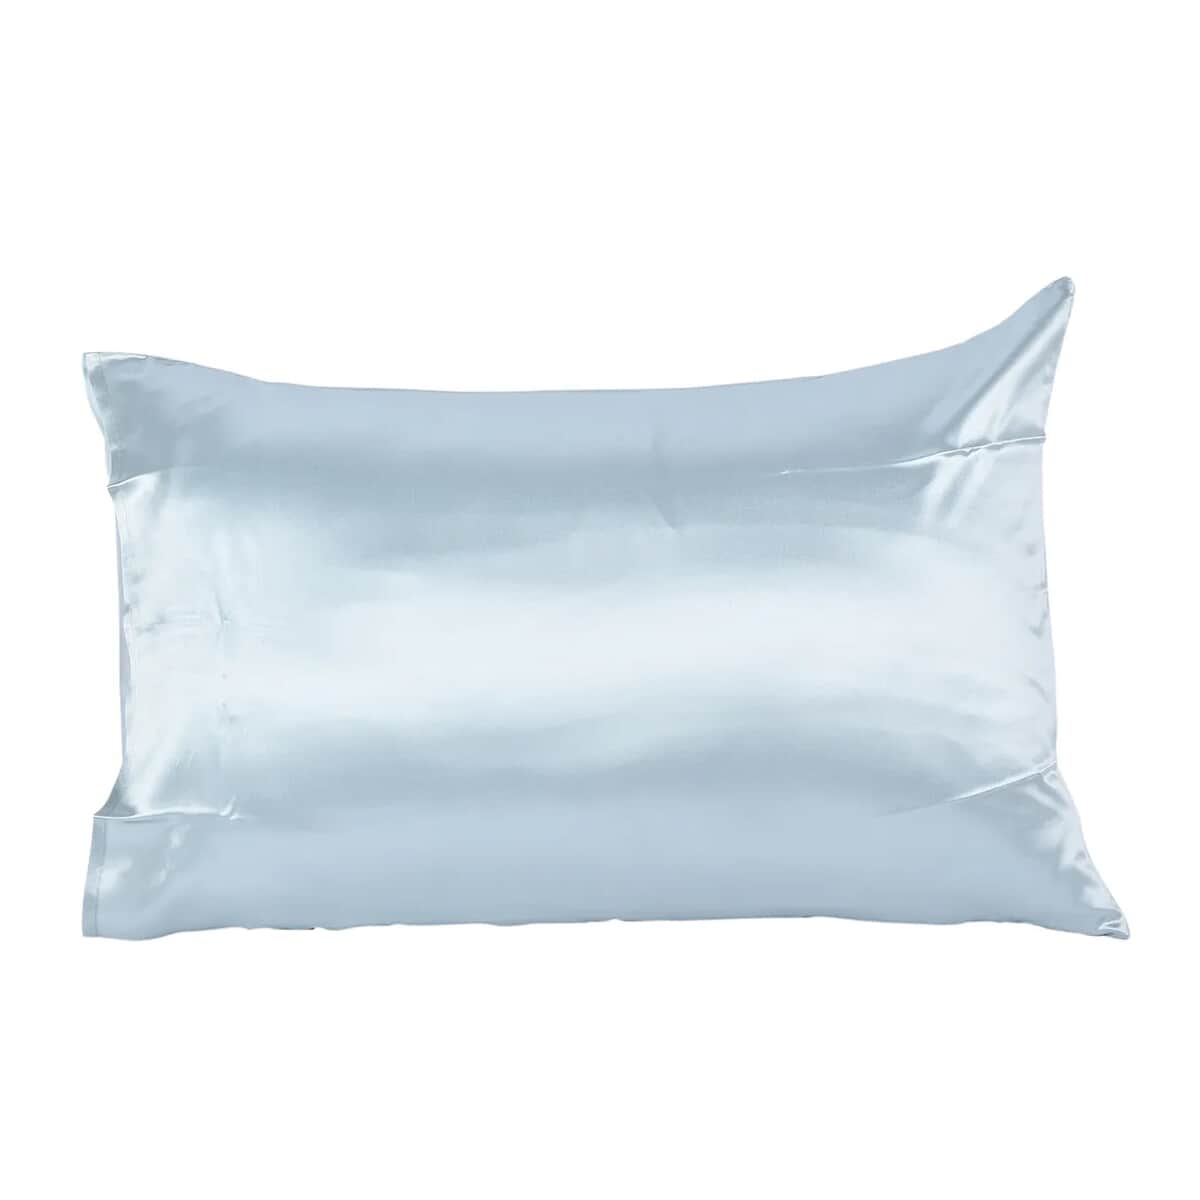 Symphony Home Blue 100% Mulberry Silk Pillowcase Infused with Hyaluronic Acid & Argan Oil - Full, Pillow Protectors, Pillow Cover, Cushion Cover, Pillow Shams, Pillow Case Covers image number 0